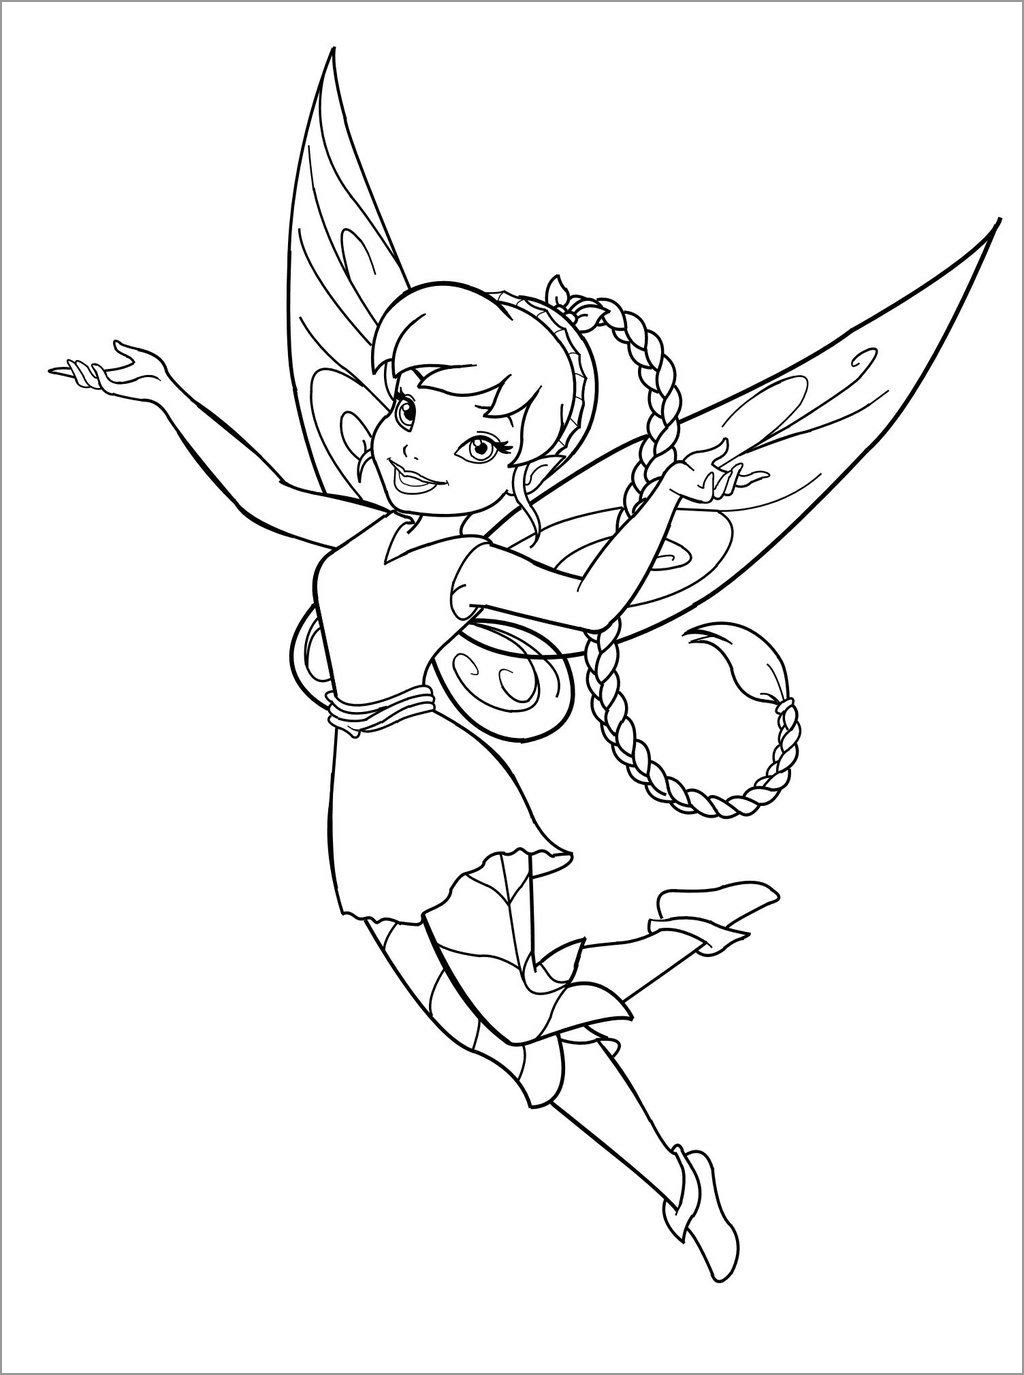 Printable Fairy Coloring Pages to Print